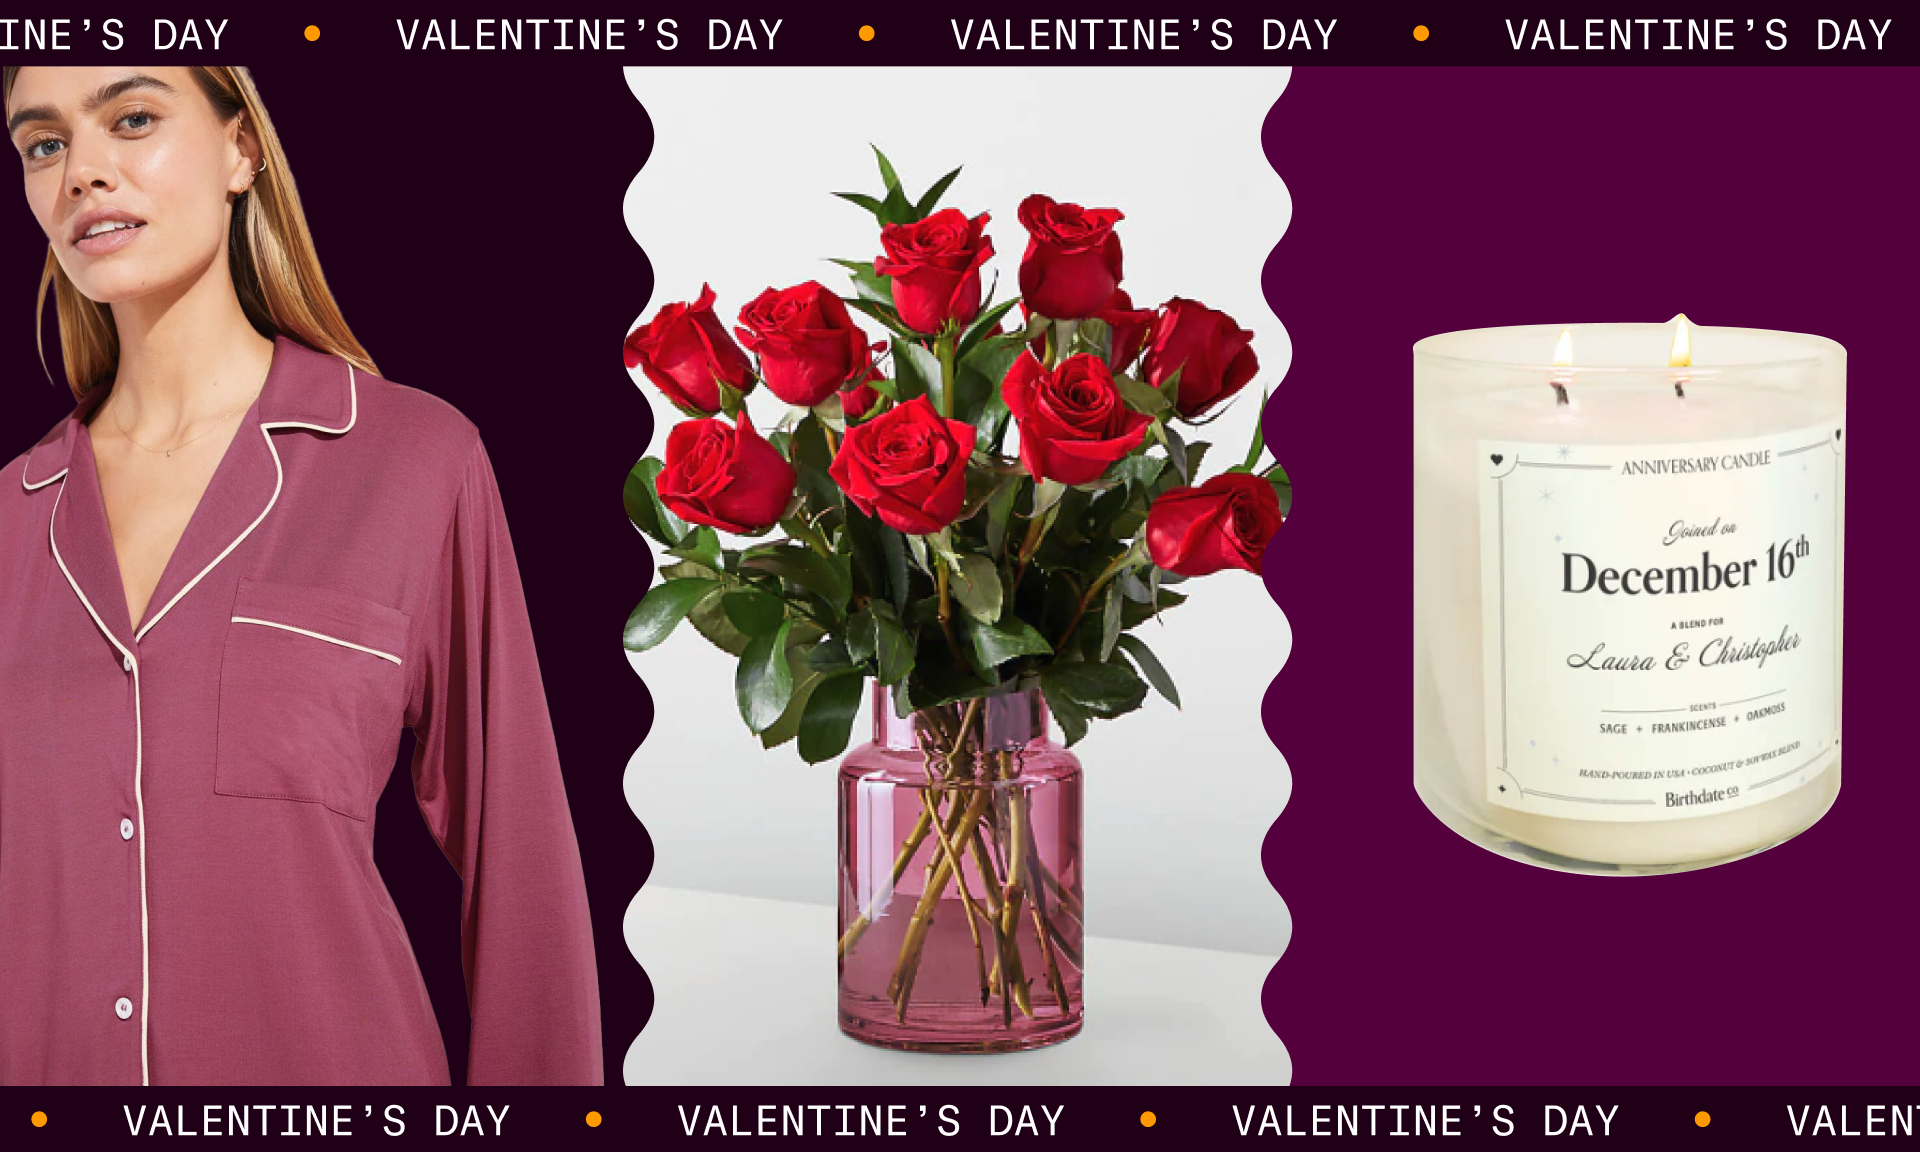 practical valentine's day gifts